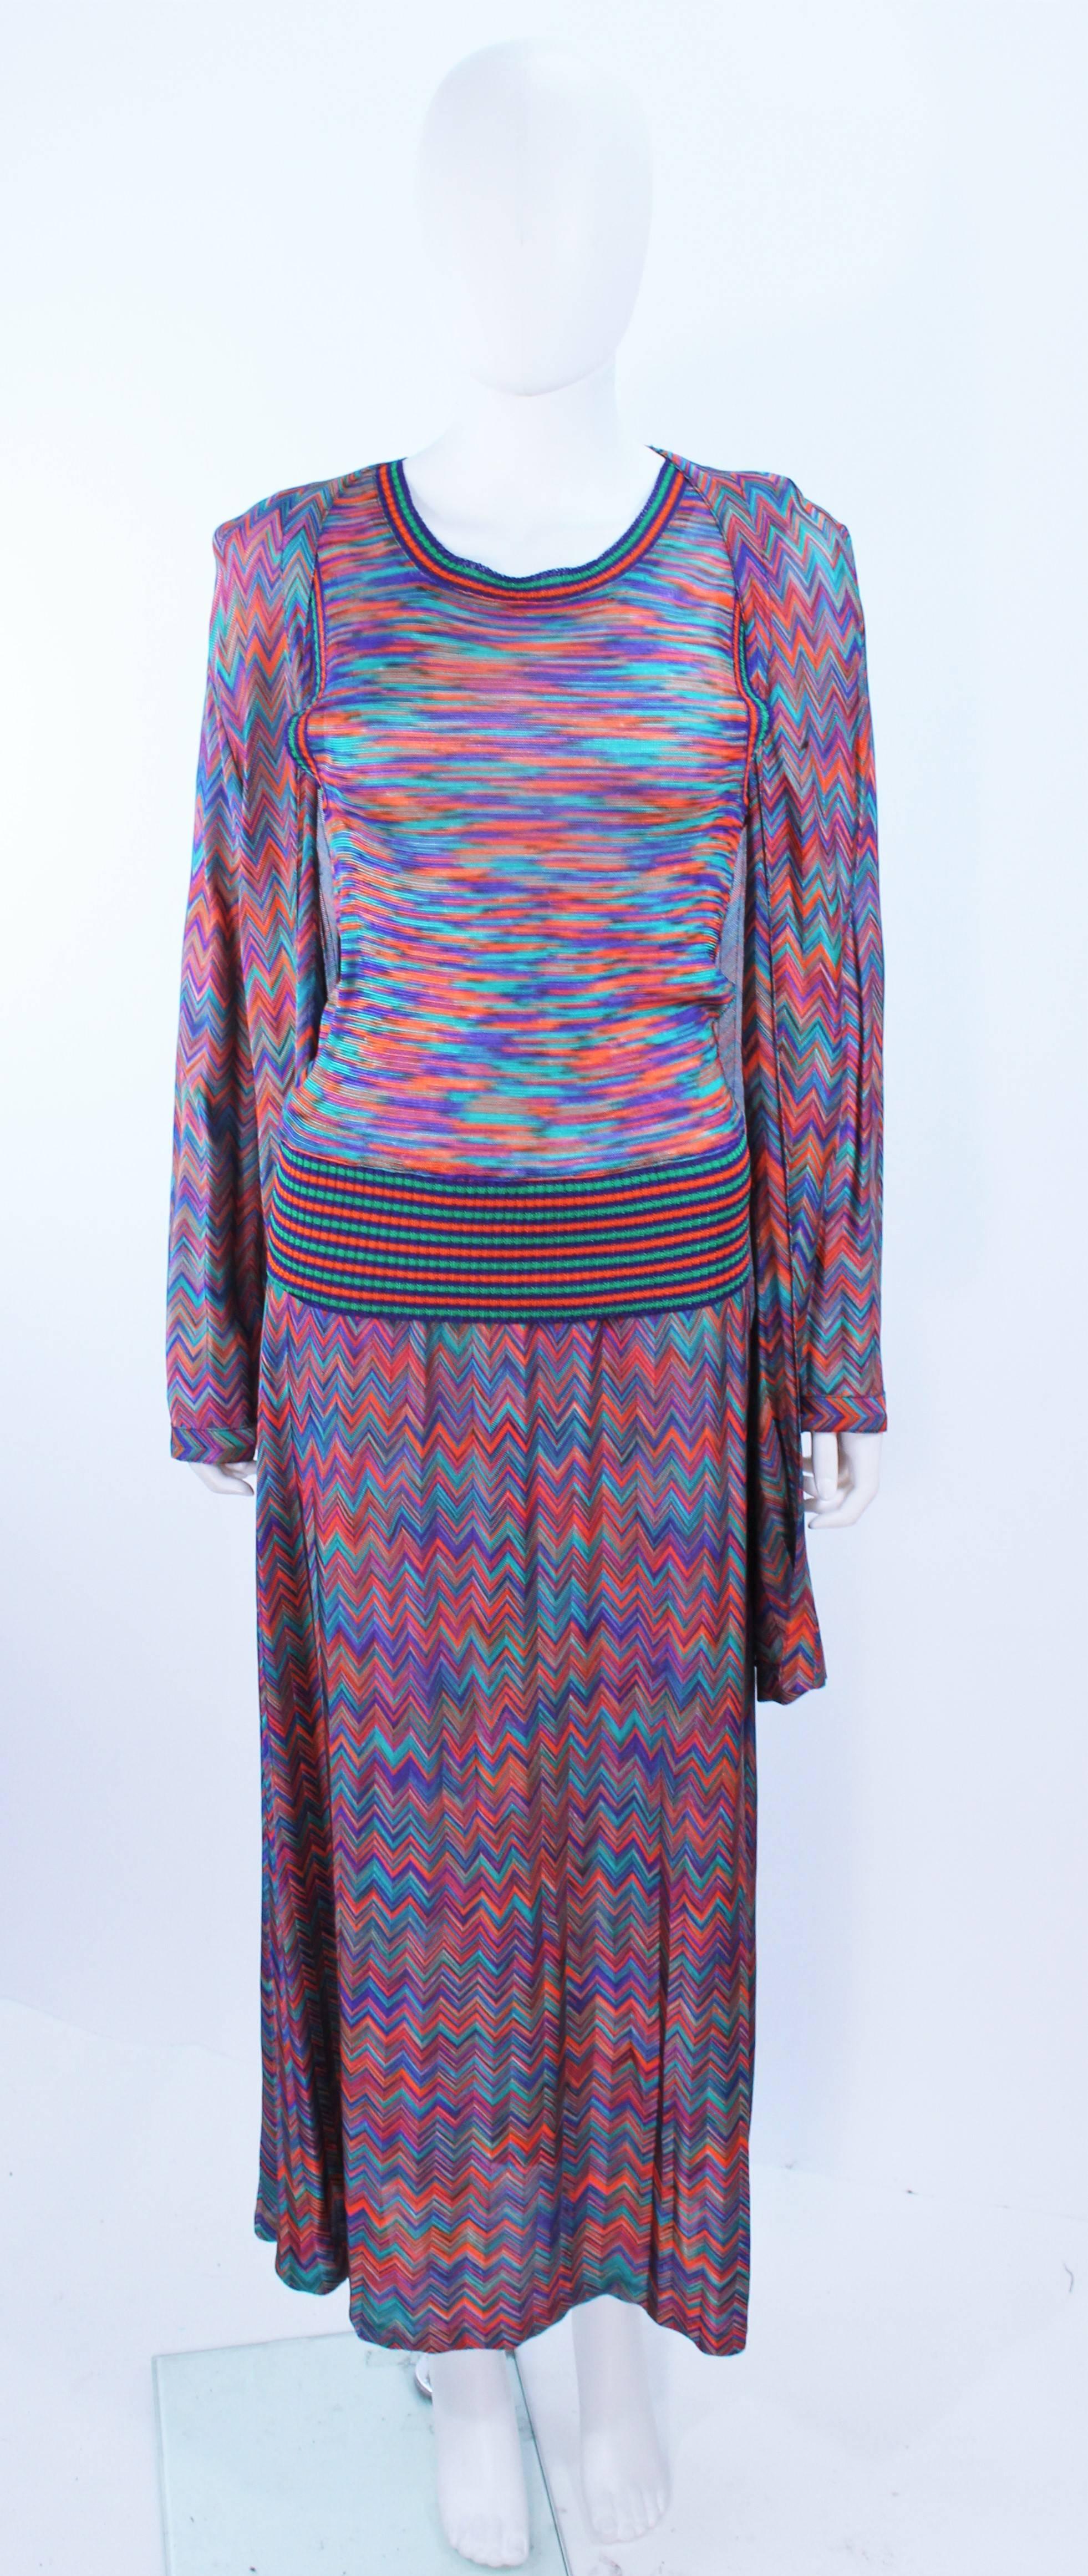 MISSONI Purple Green Turqouise Orange Zig Zag Knit 5pc Ensemble Size 6 8 In Excellent Condition For Sale In Los Angeles, CA